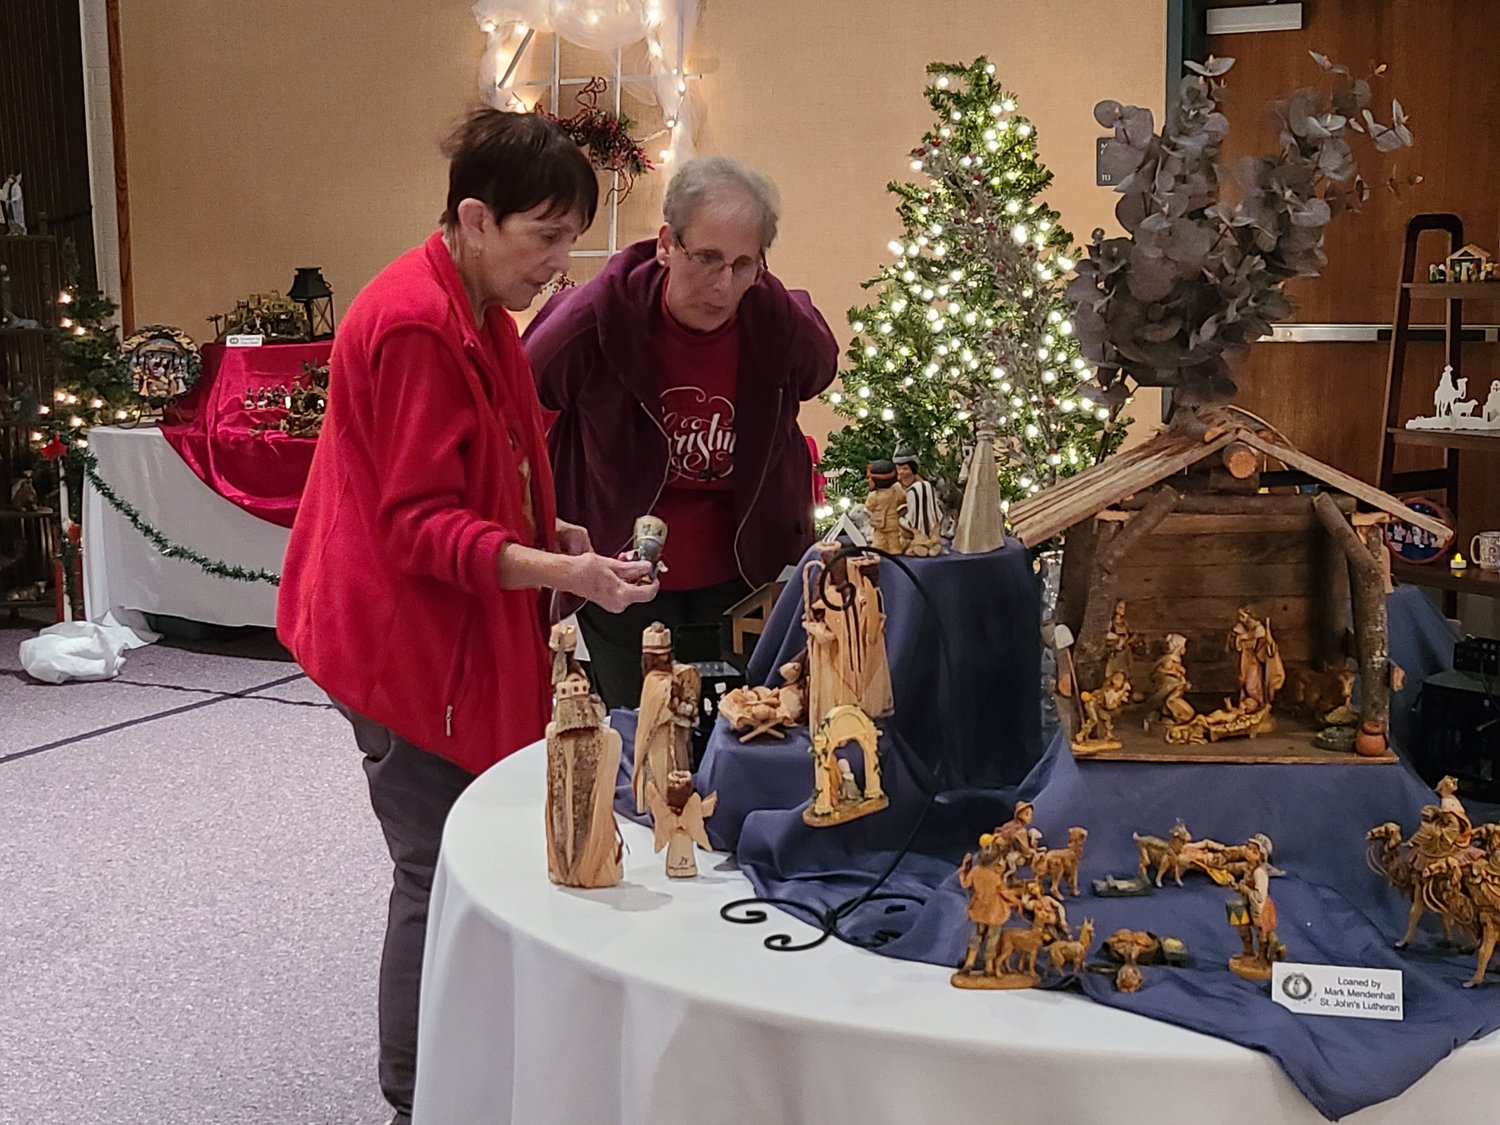 Vicki Gilson, left, and Terry Brannon work on completing the scavenger hunt amidst almost 300 nativities during the Nativity Festival at the local Church of Jesus Christ of Latter-day Saints on Saturday. The list of requirements for the scavenger hunt included finding the smallest nativity, tallest nativity, a donkey wearing a bell, a picture of Joseph holding Jesus, and many more. Attendees were also encouraged to write down their favorites, which Gilson and Brannon said they couldn’t choose.